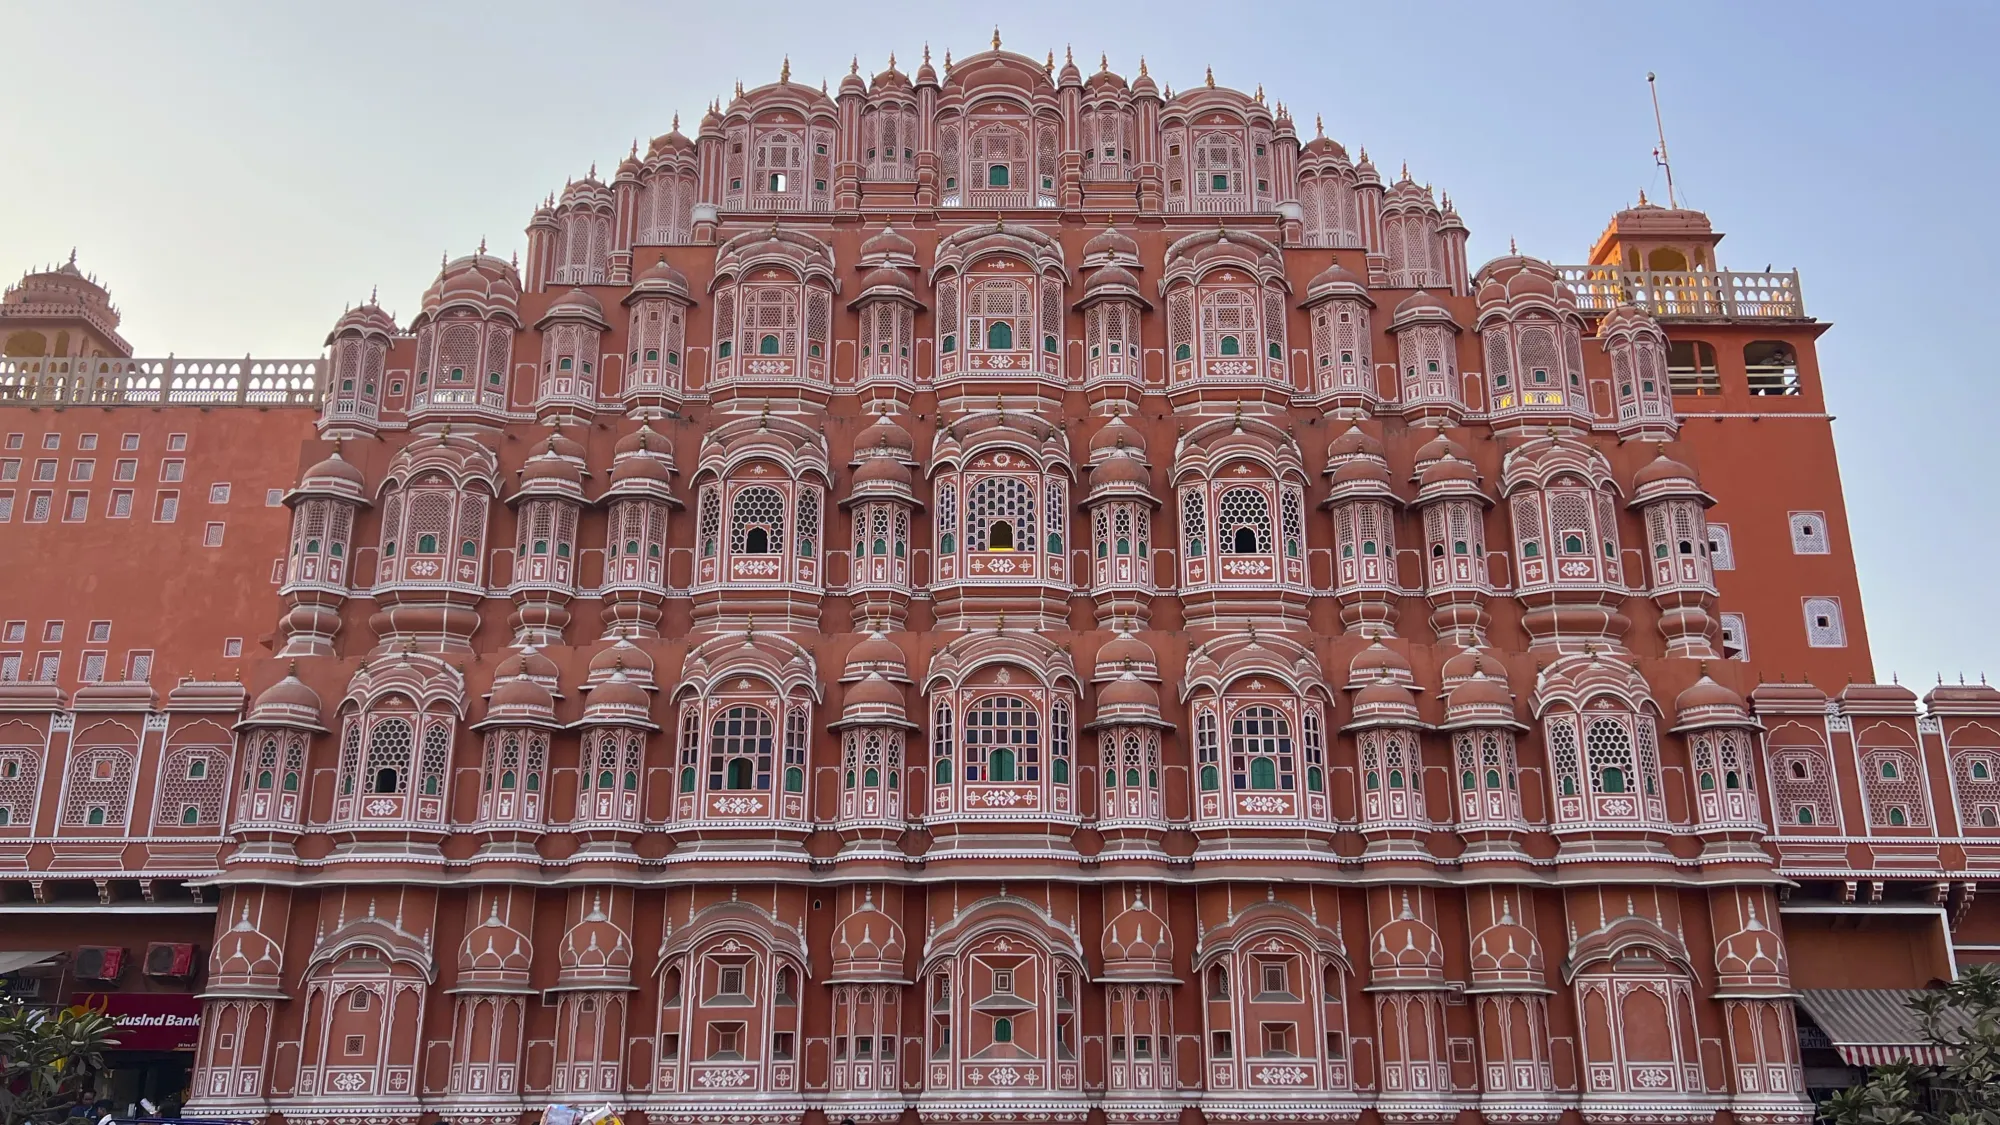 Pink face of the Hawa Mahal covered in screens